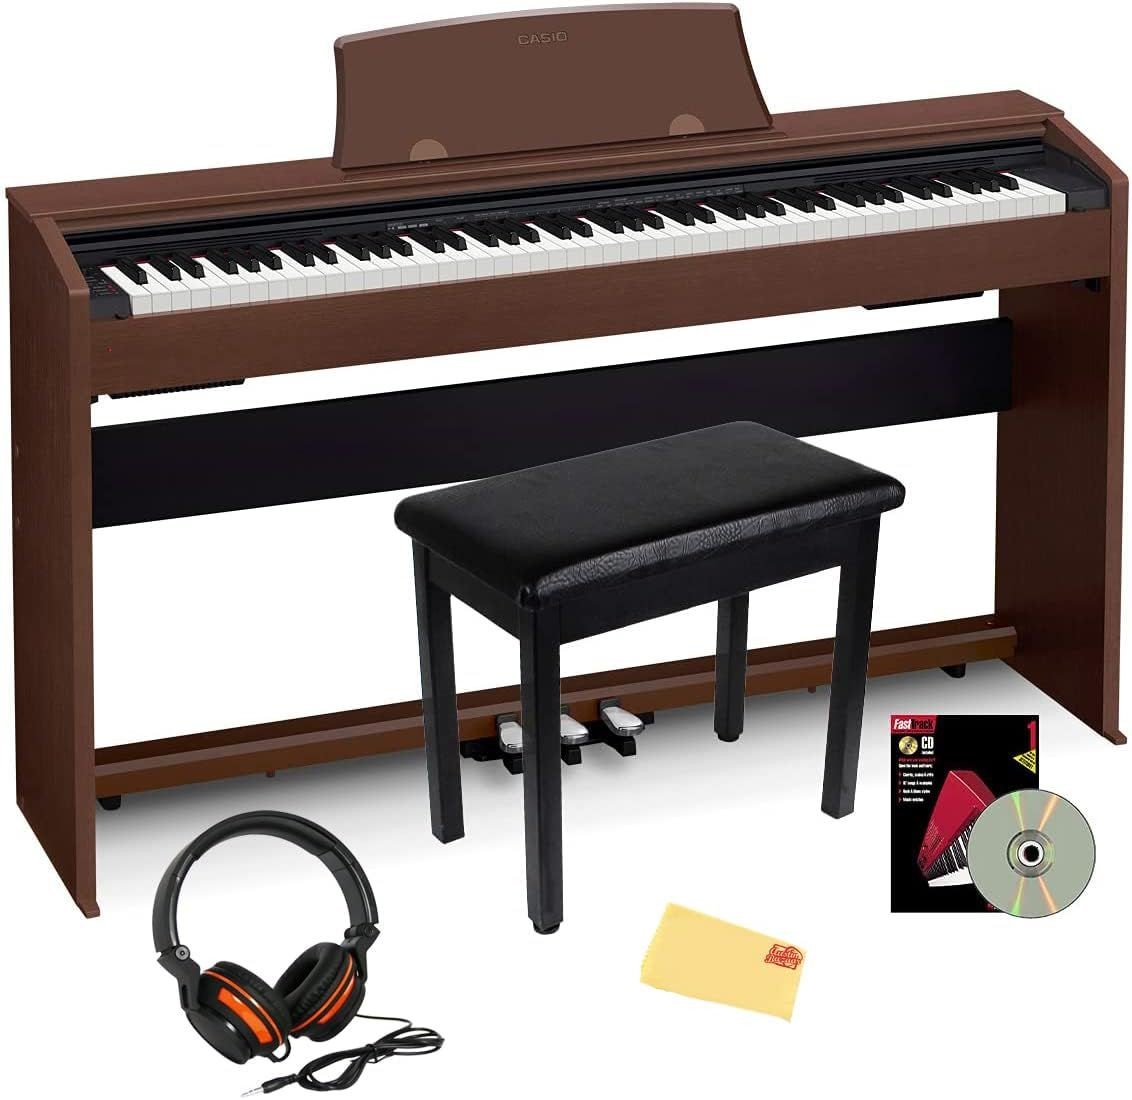 brown Casio PX-770 keyboard with black bench and headphones